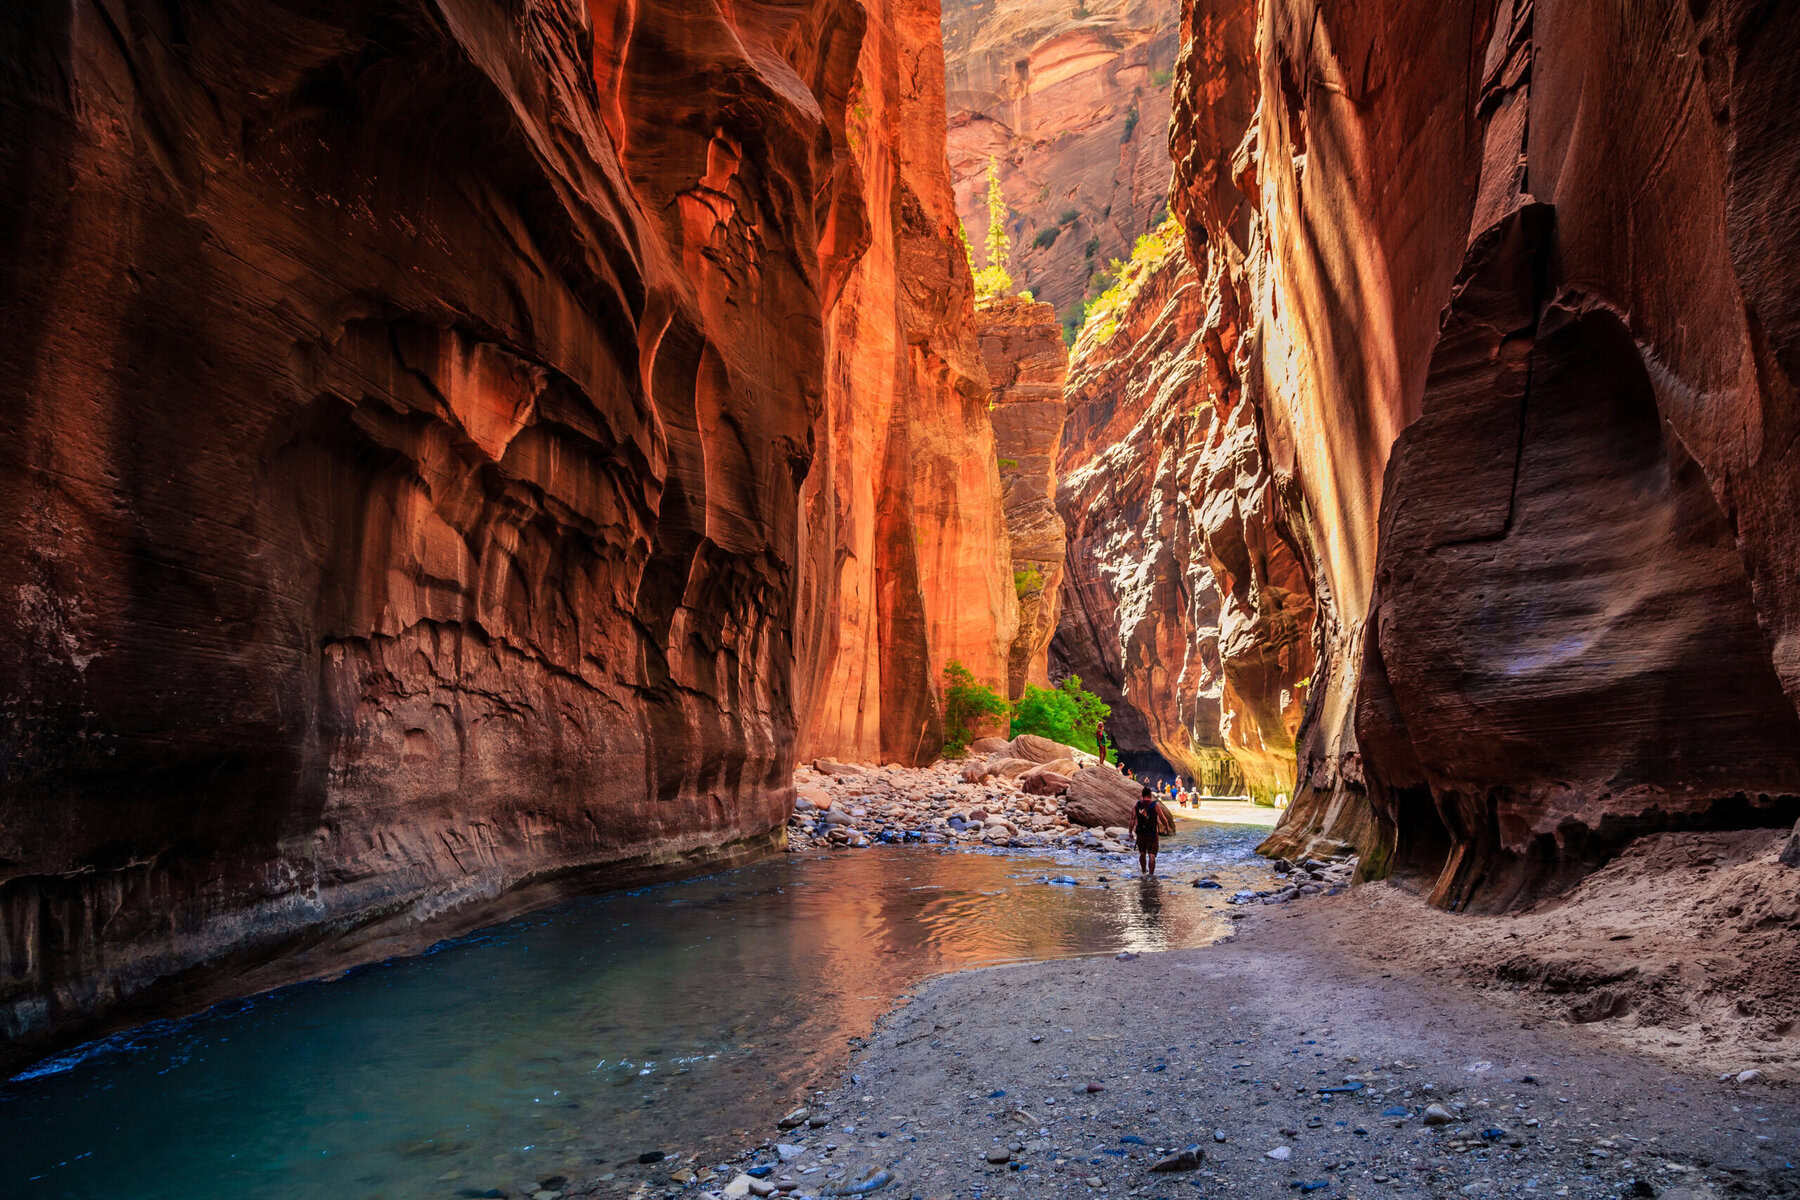 The Narrows in Zion Canyon.